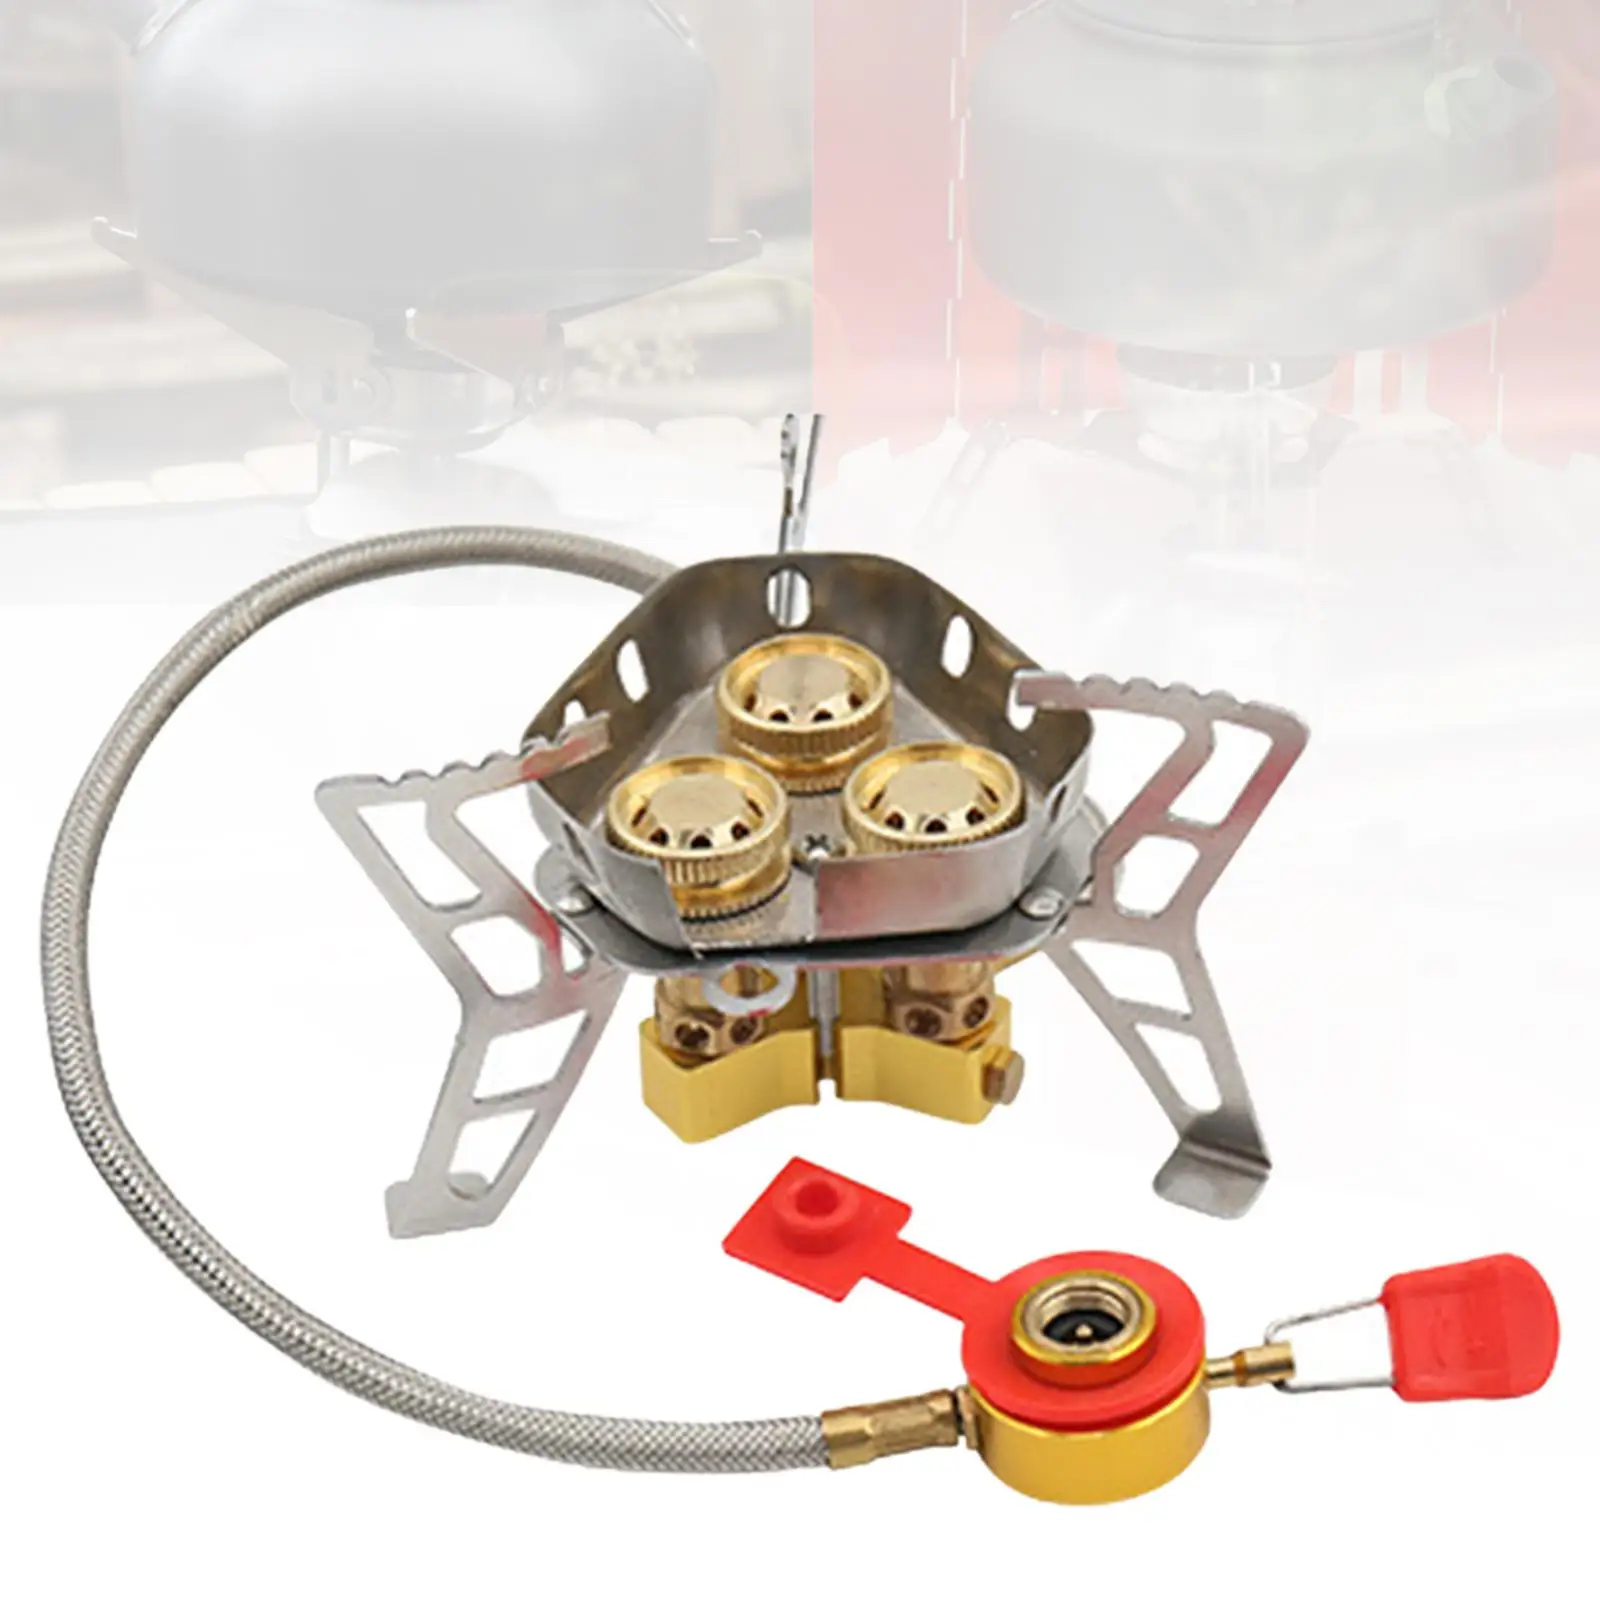 Portable Camping Gas Stove Cooker Gear Ultralight Adjustable Folding Stove Burner for Fishing Backpacking Hotel Hiking Outdoor